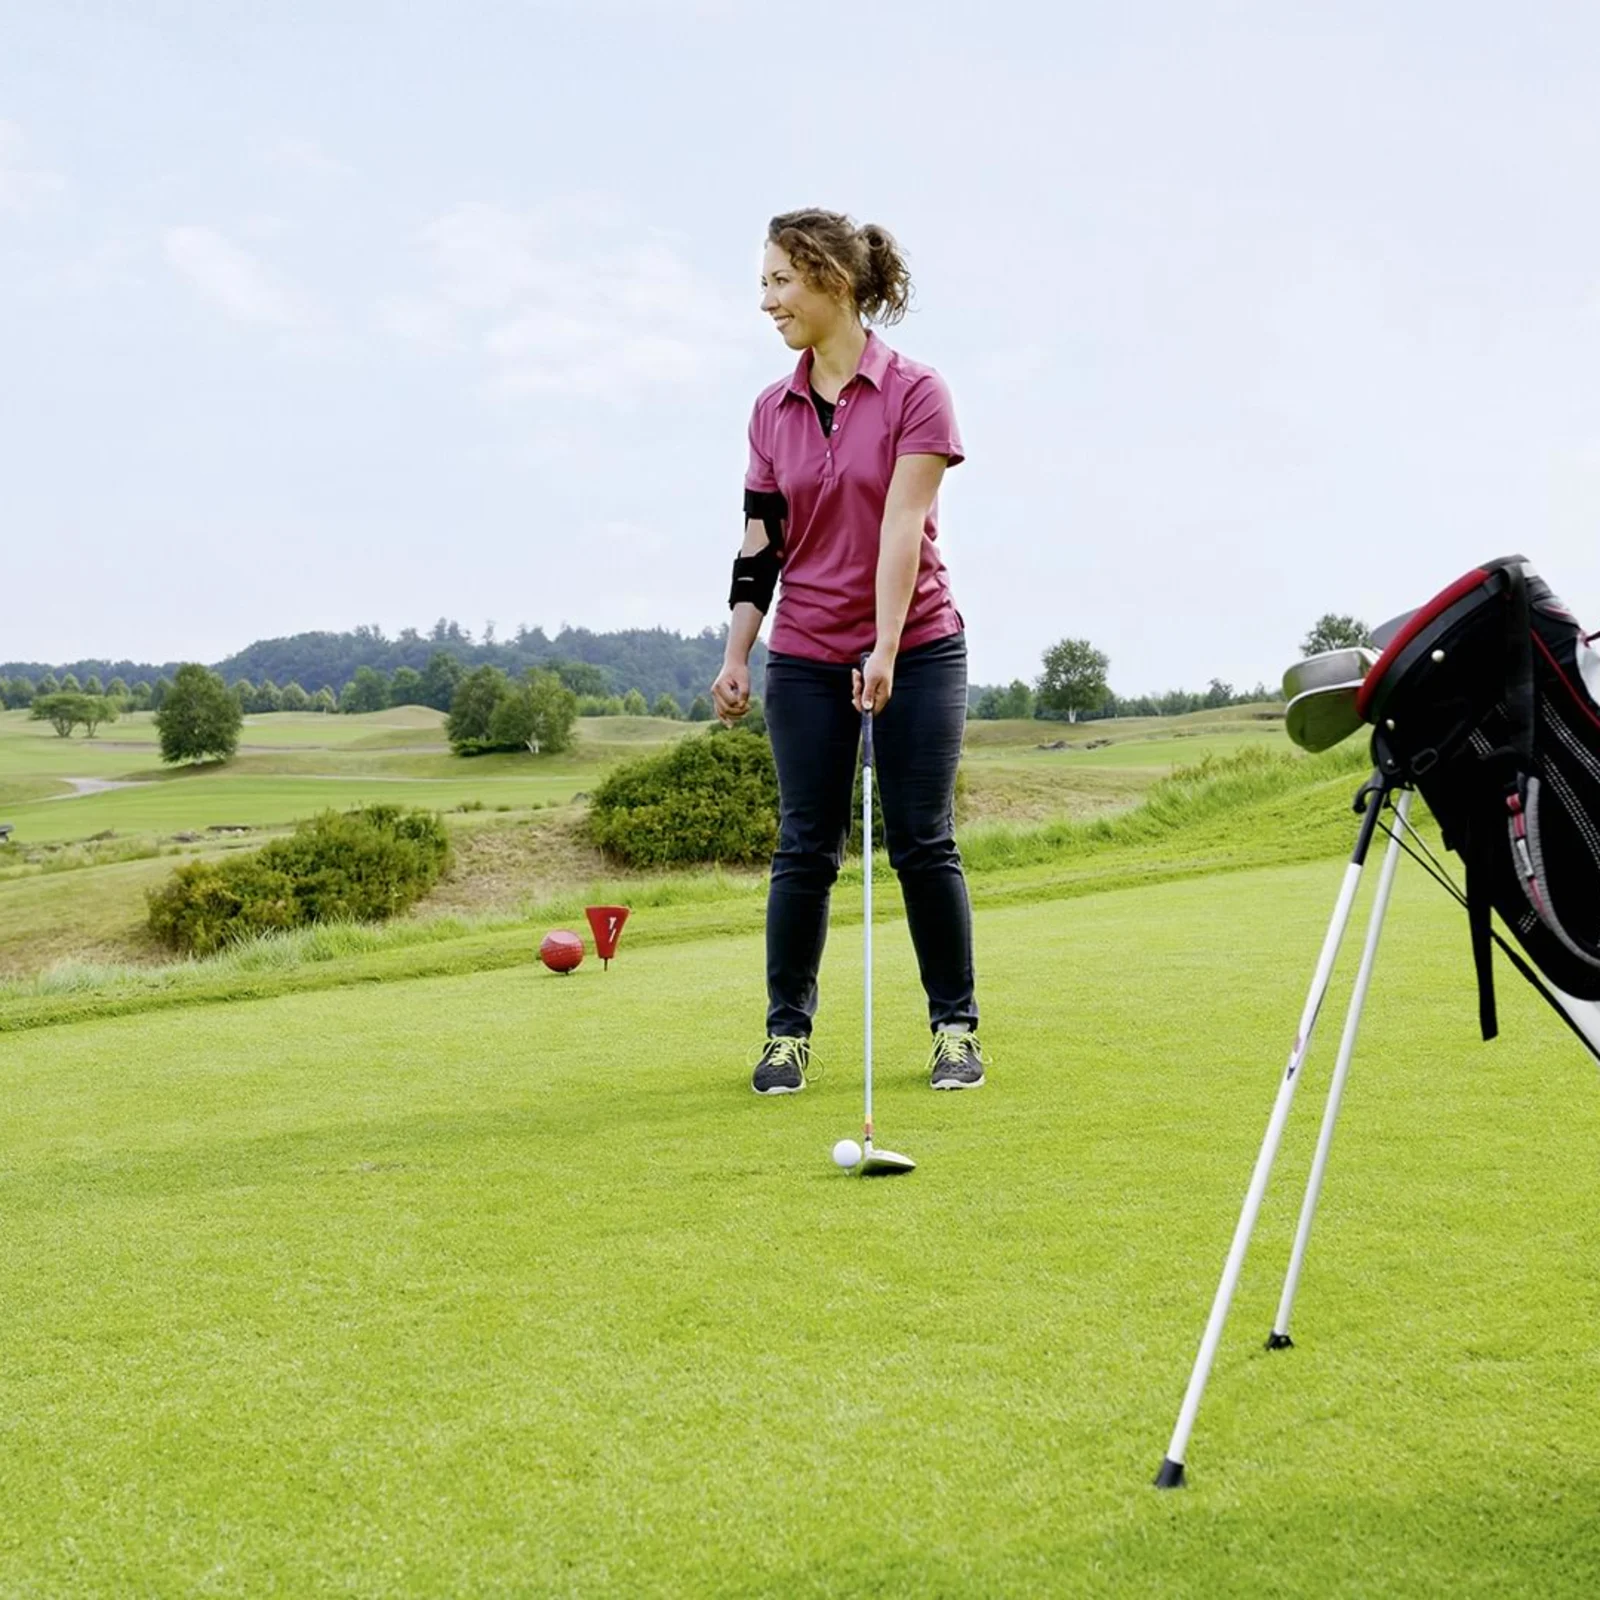 ottobock-orthosis-user-playing-golf-on-golfcourse